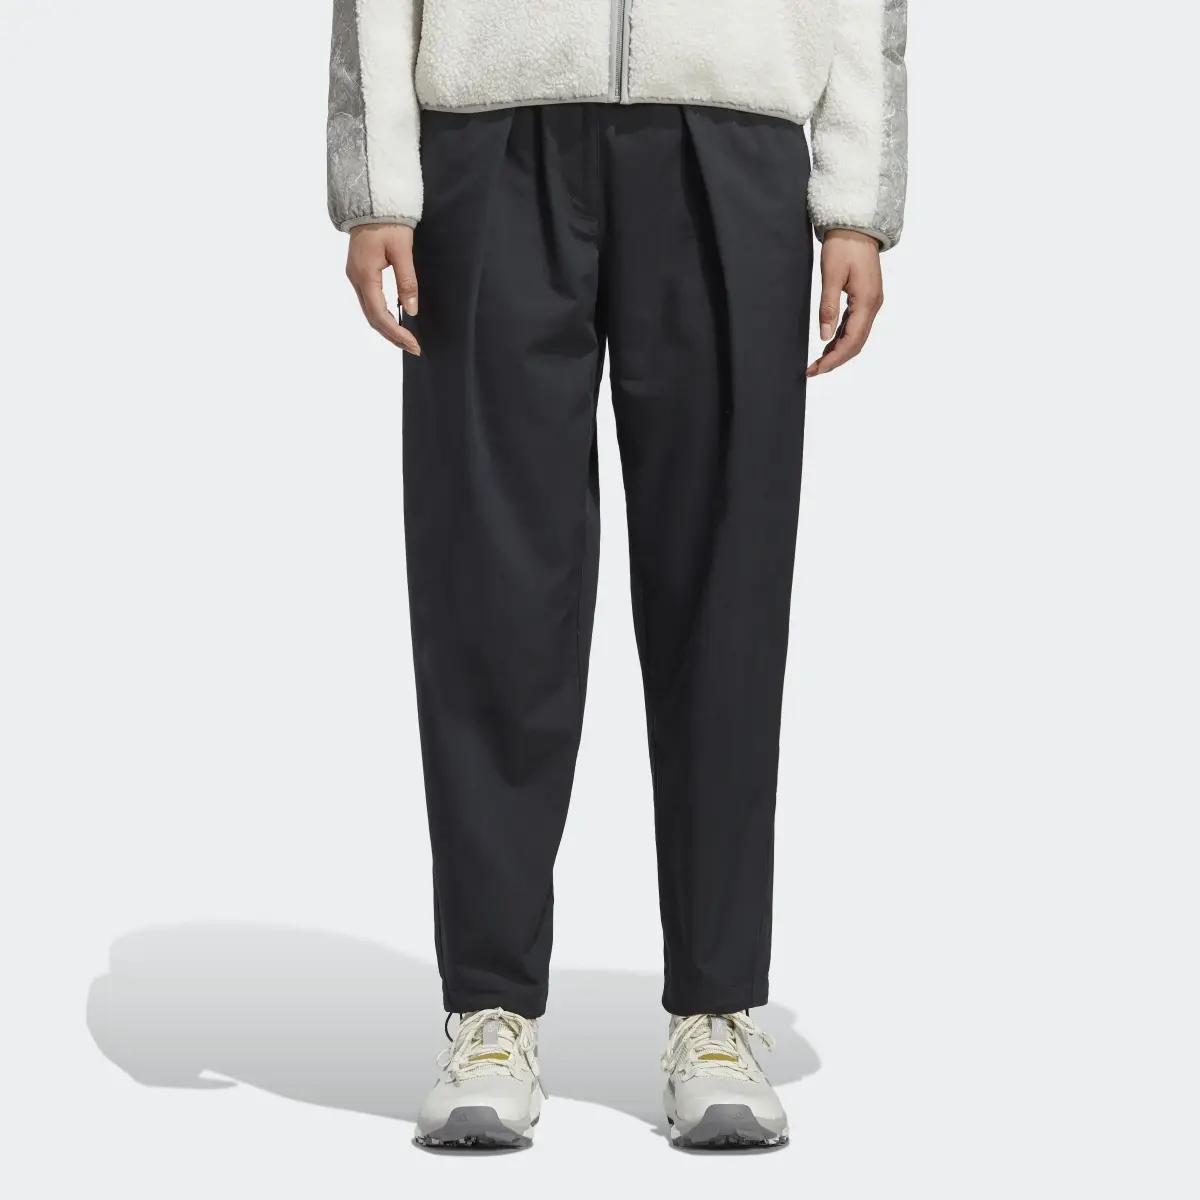 Adidas Terrex x and wander Trousers. 1